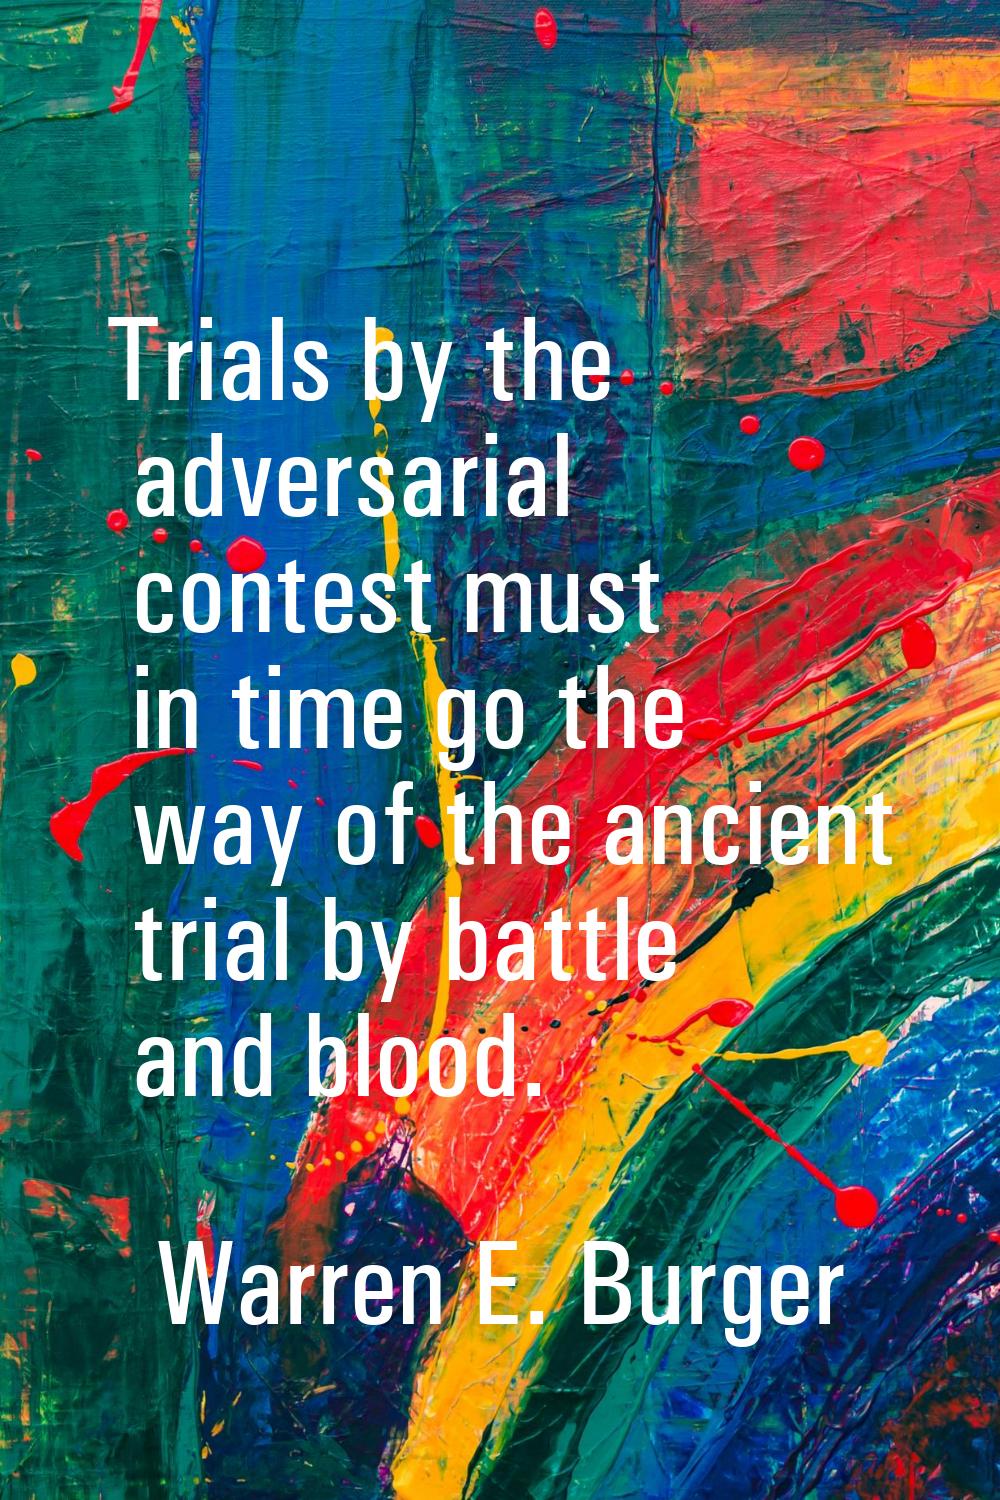 Trials by the adversarial contest must in time go the way of the ancient trial by battle and blood.